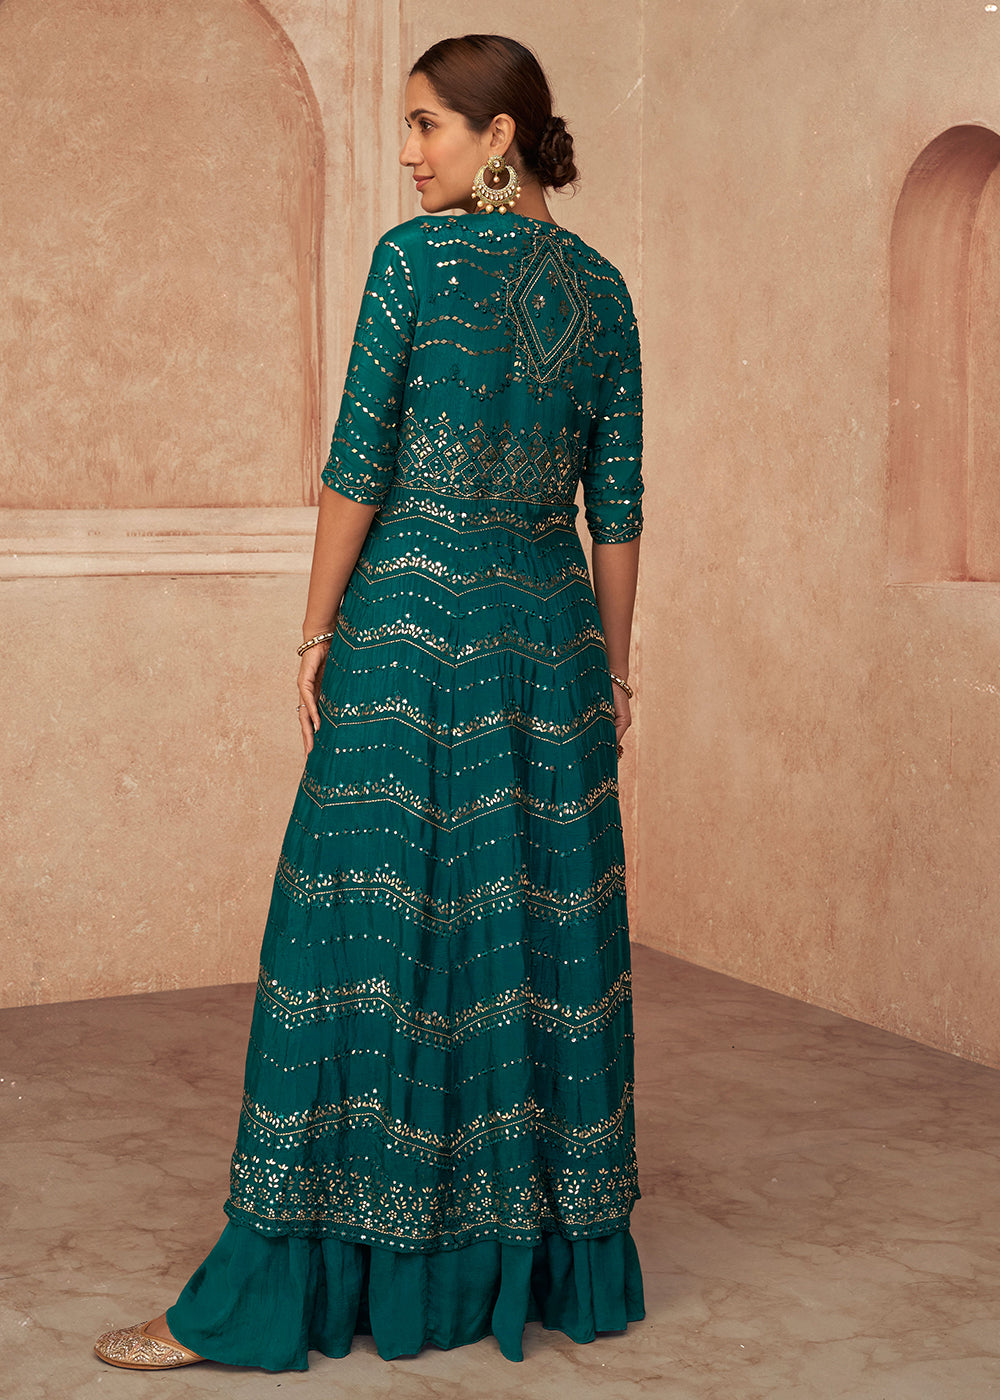 Shop Now Teal Blue Chinon Silk Party Wear Lehenga Choli with Jacket Online in USA, UK, Canada & Worldwide at Empress Clothing.